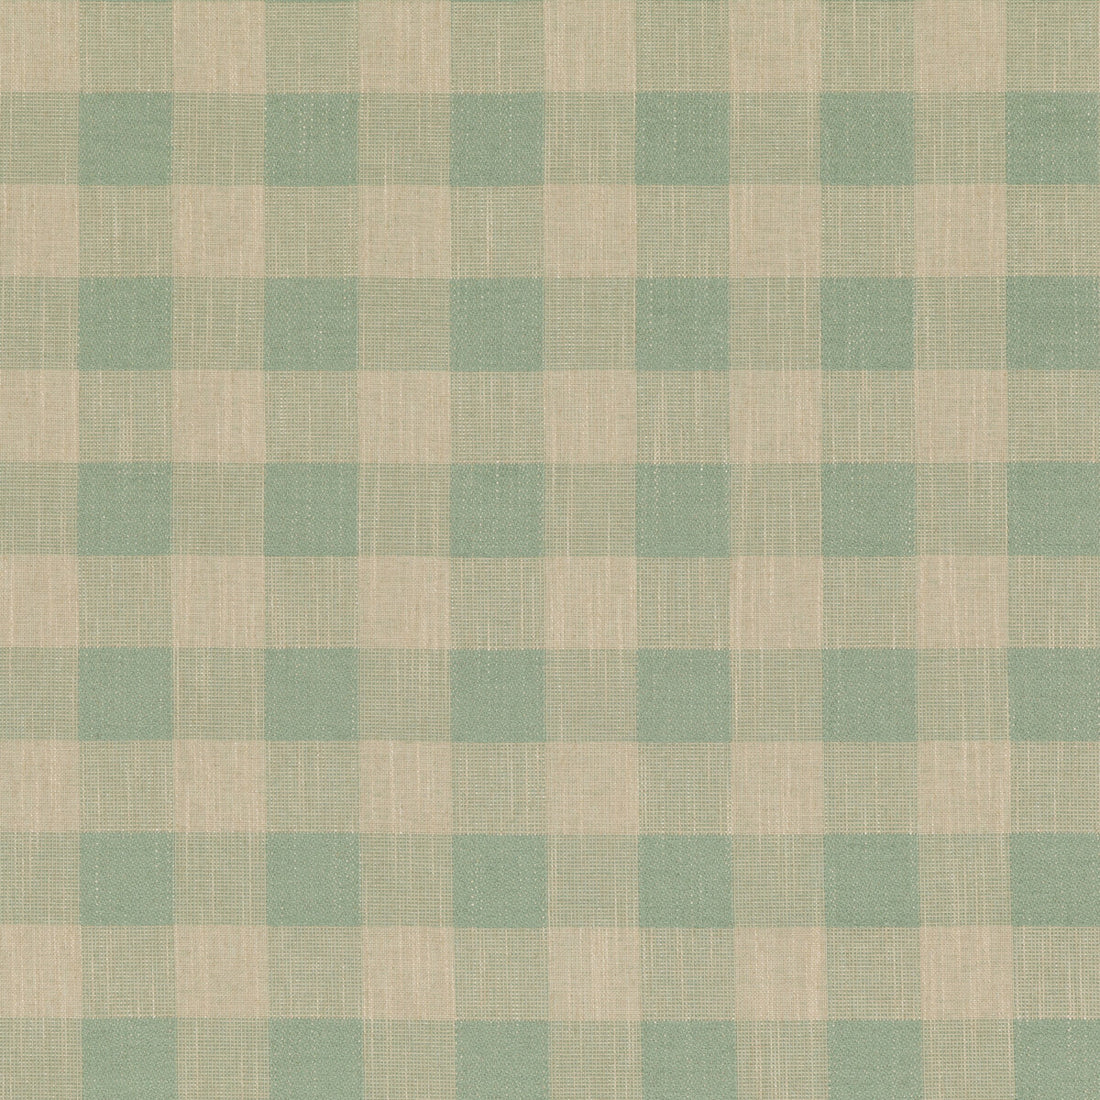 Block Check fabric in soft aqua color - pattern PF50490.715.0 - by Baker Lifestyle in the Block Weaves collection